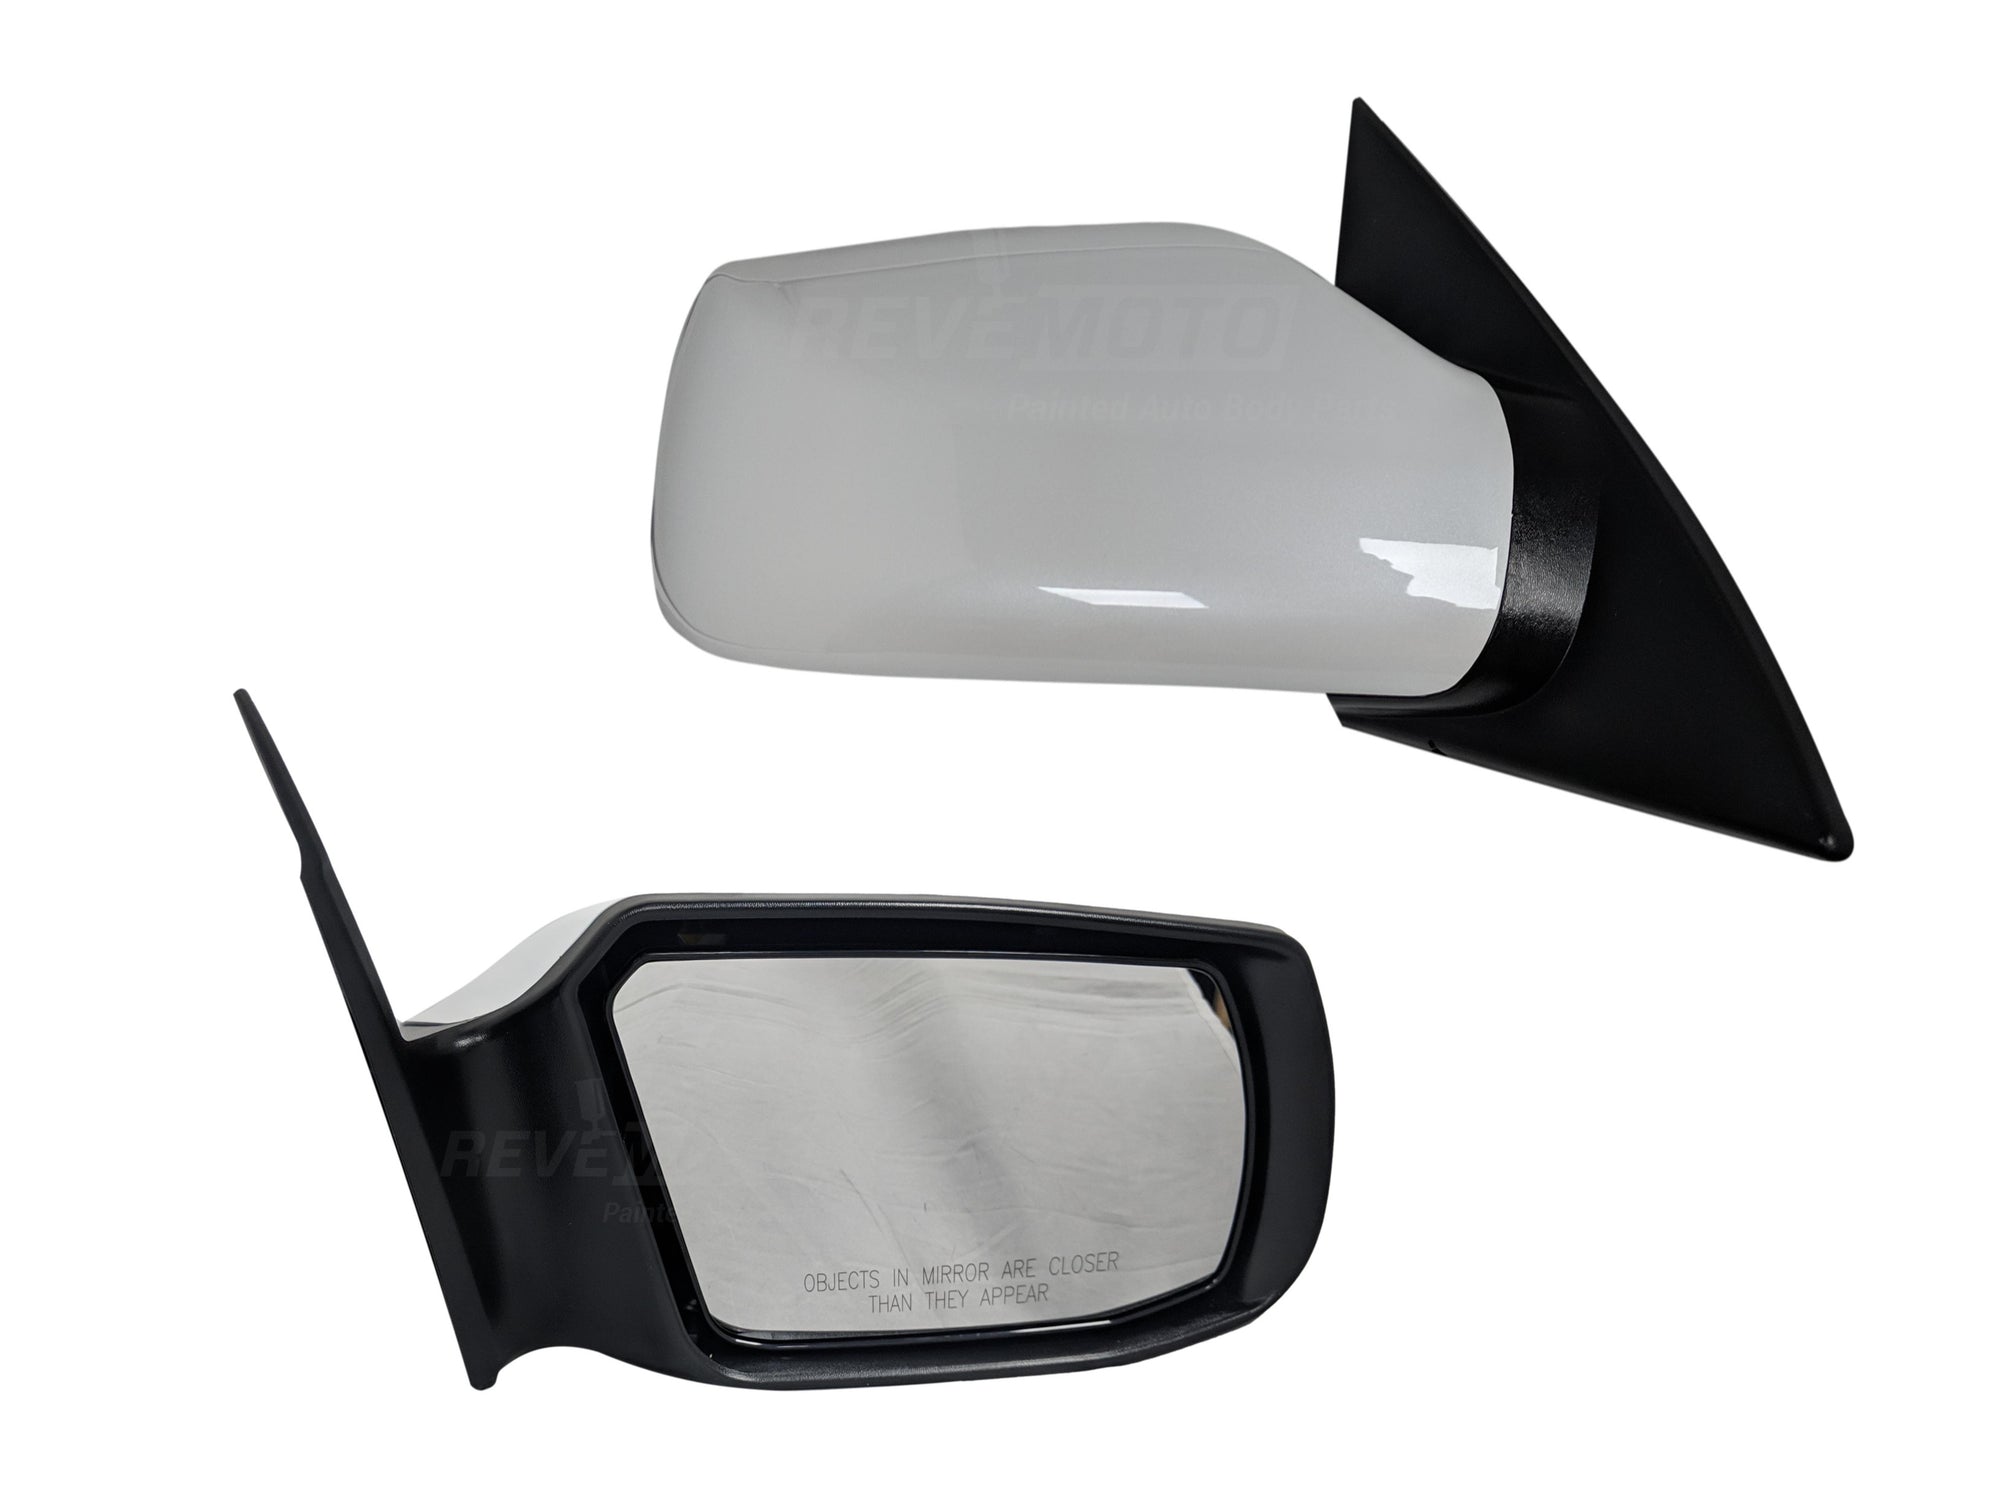 2011 Nissan Altima Passenger Side View Mirror, Without Heated Glass, Without Signal Lamp, 2.5 Liter, Sedan, 4 Door, PaintedSatin White Pearl (QX3) 96301JA04A NI1321163